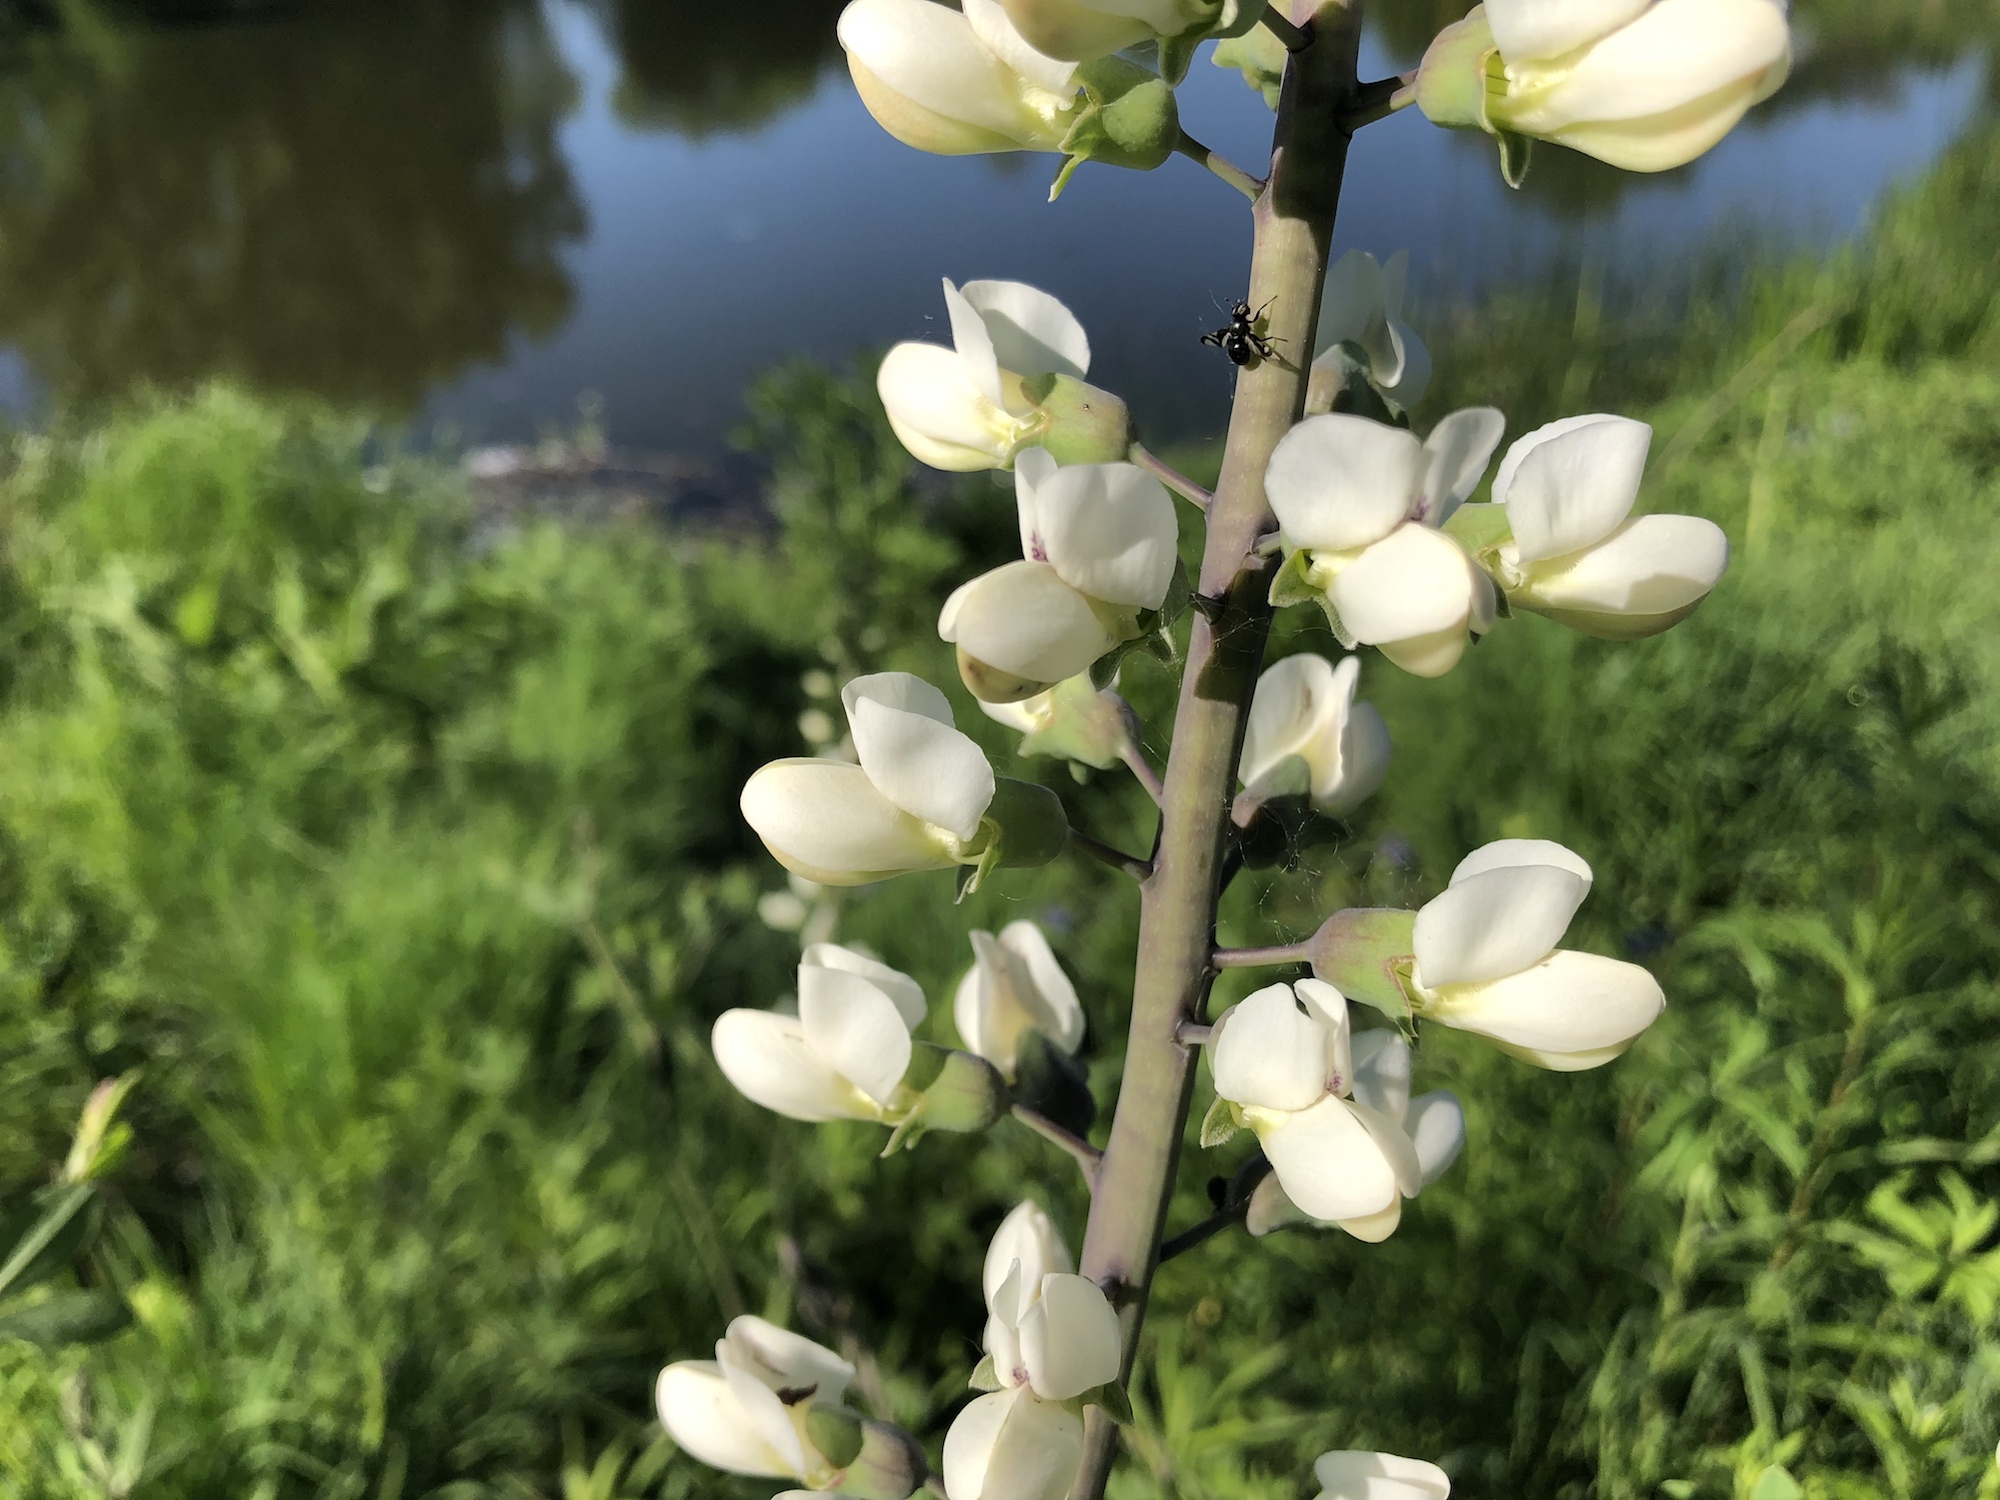 White Wild Indigo on the banks of the retaining pond on the corner of Nakoma Road and Manitou Way on June 8, 2019.